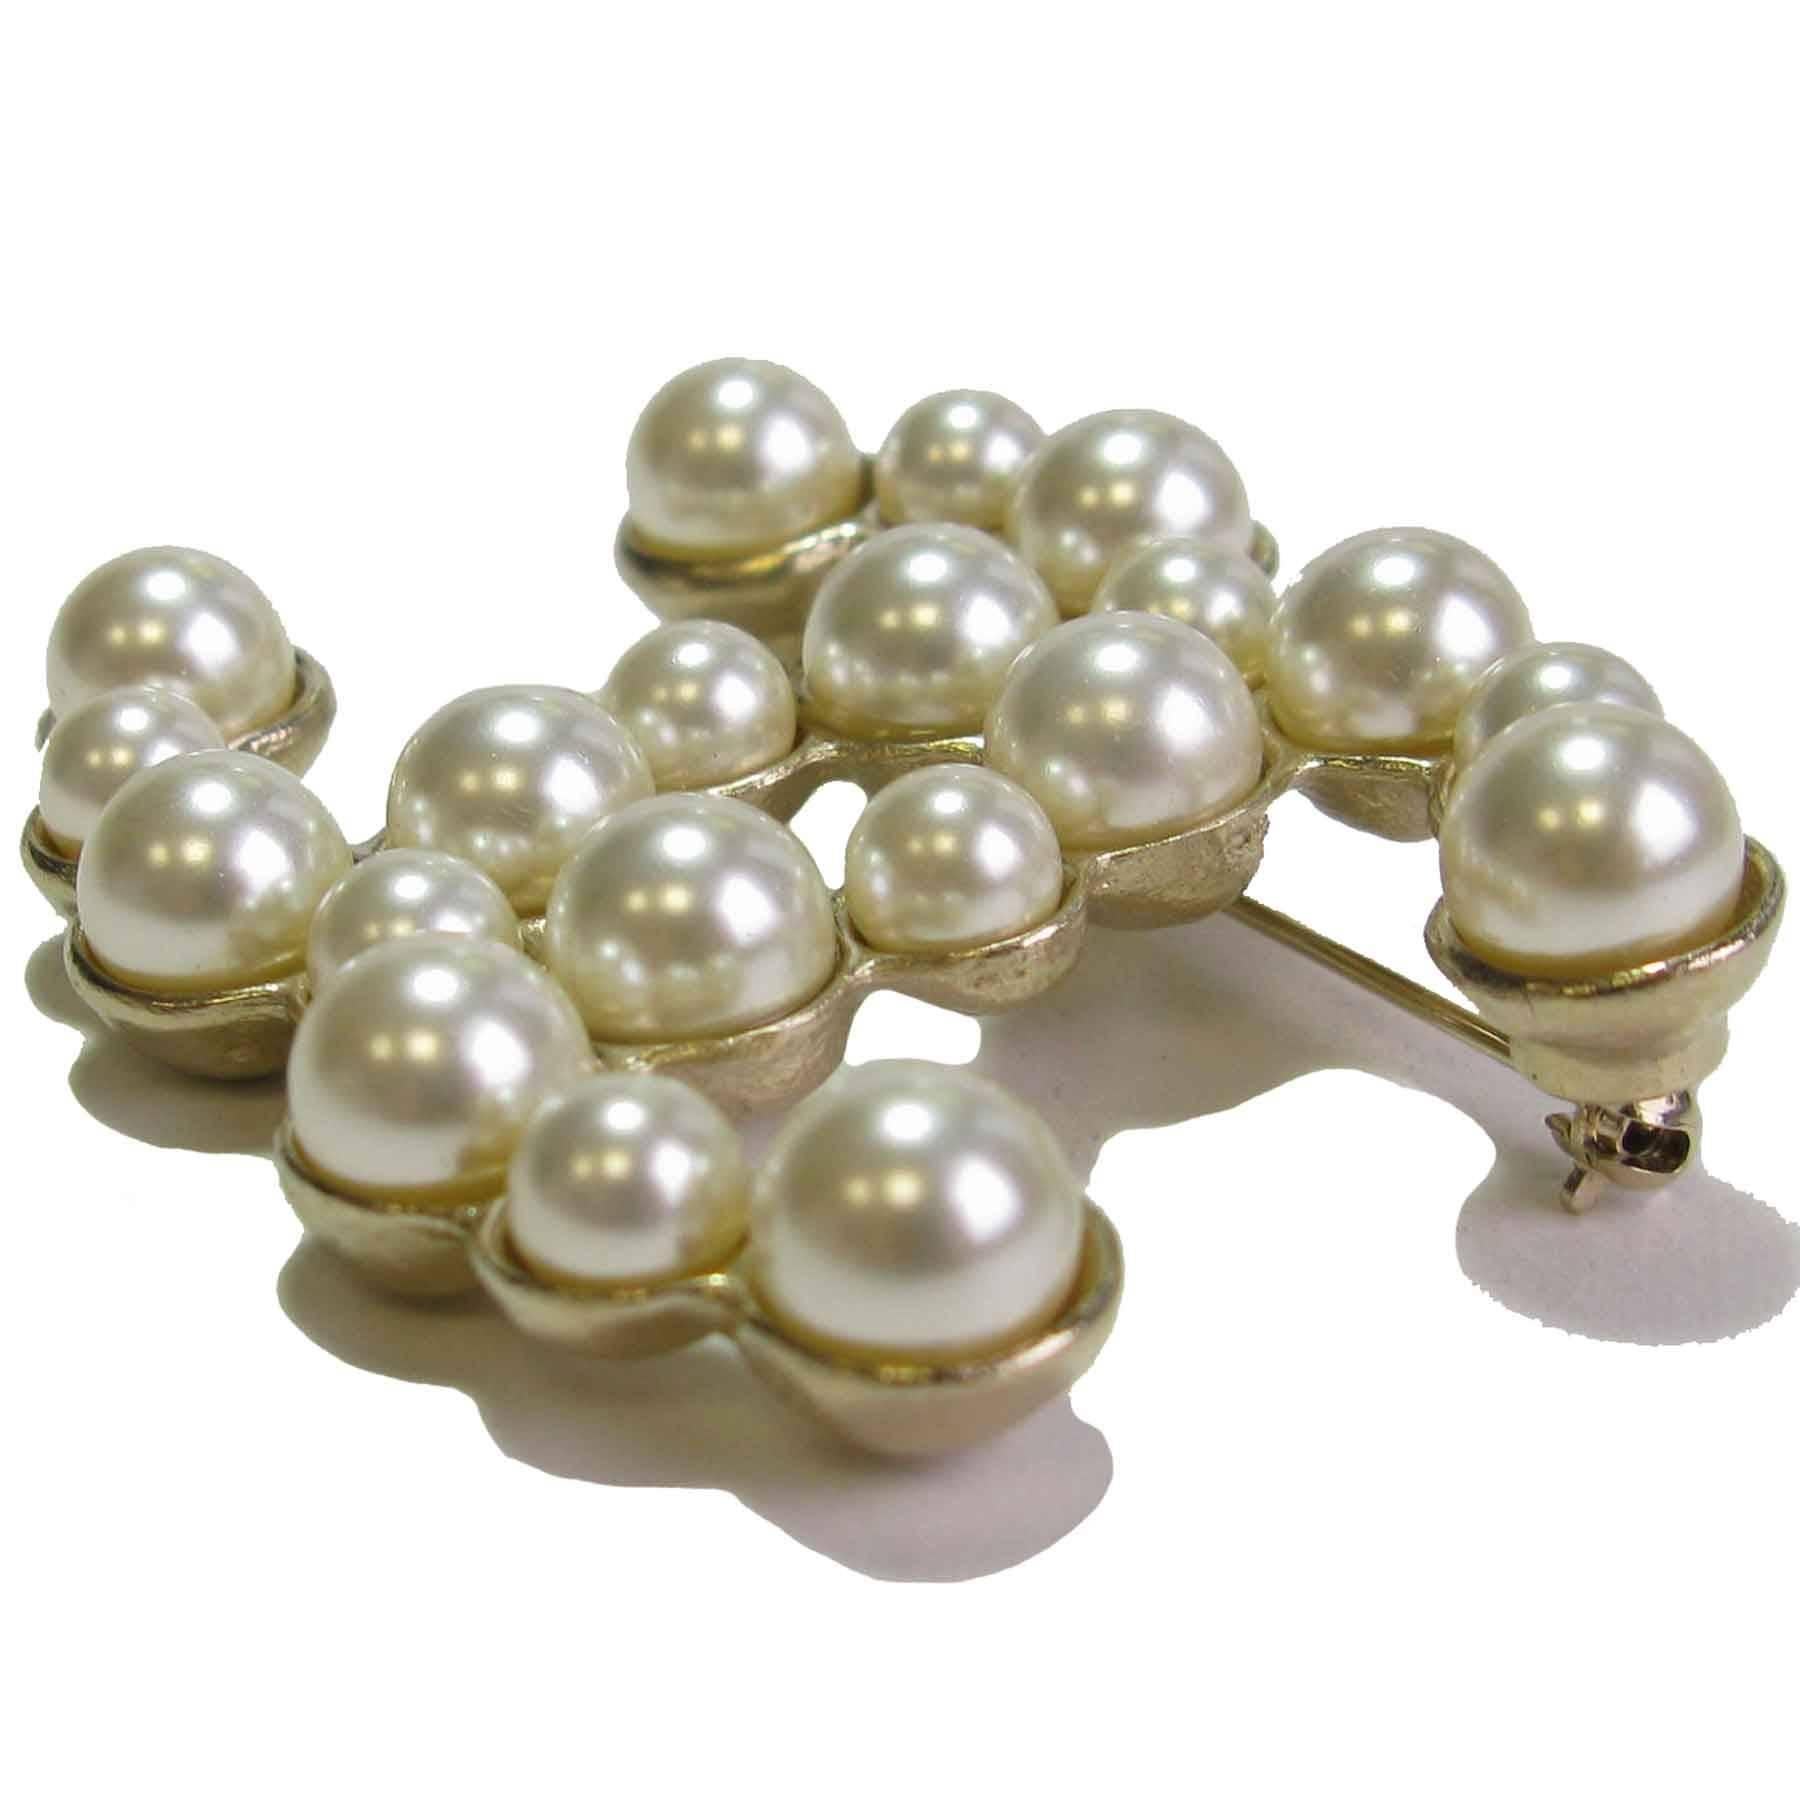 Very beautiful Chanel brooch, double C in gilt metal set with glass pearls

Never worn. Hologram of the brand on the back of the spindle. 

Collection 2014.

Dimensions: 5,5x4,5 cm

Delivered in a dustbag Valois Vintage Paris